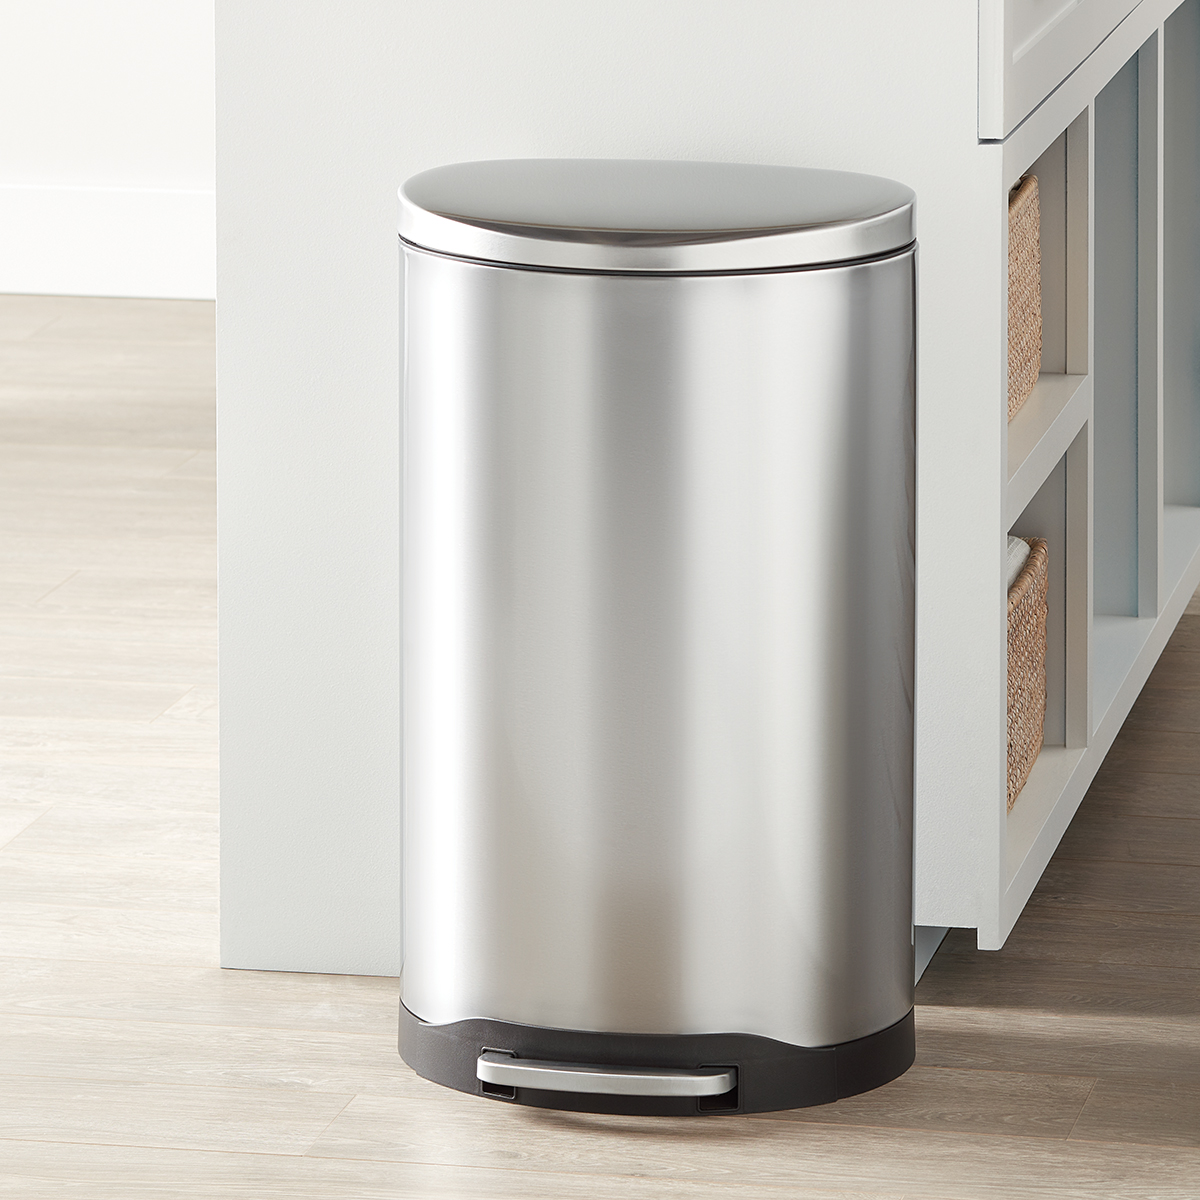 10.5 gal./ 40L Semi-Round Step Trash Can | The Container Store